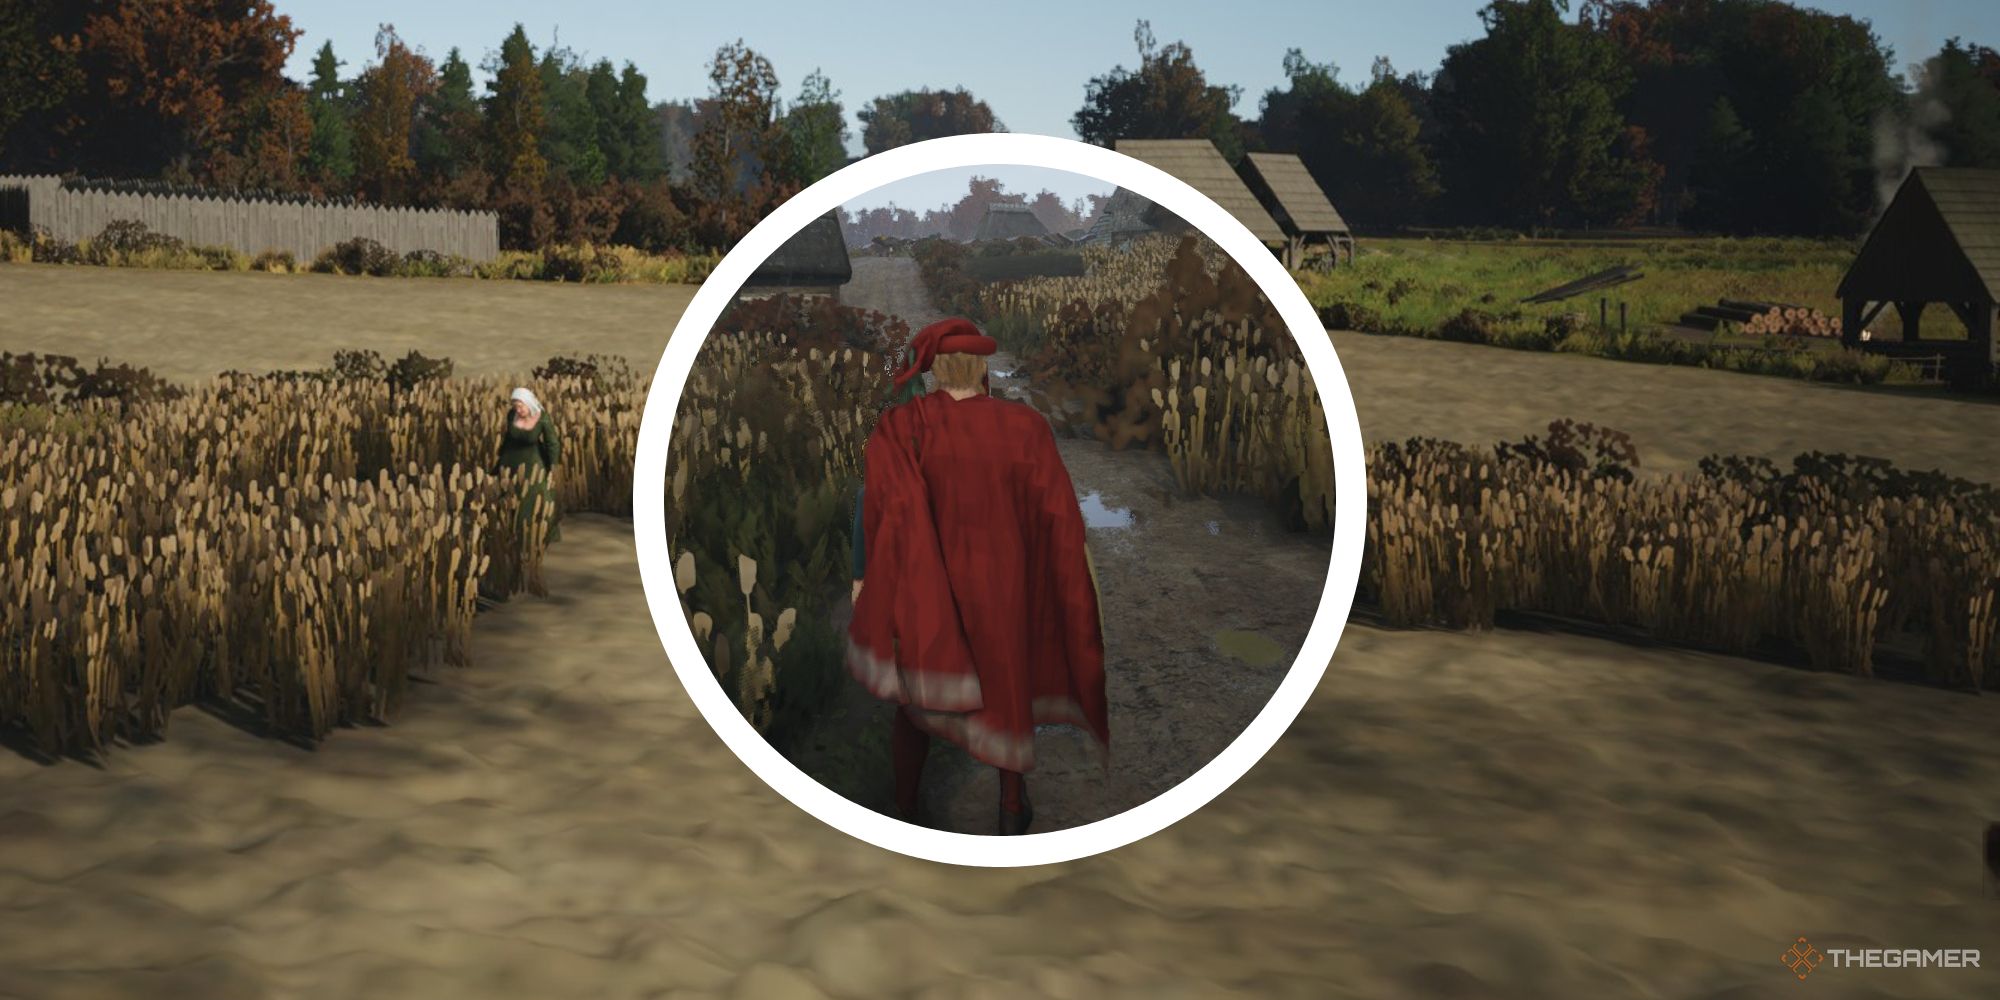 manor lords wheat field with image of first person character walking near wheat in a circle png